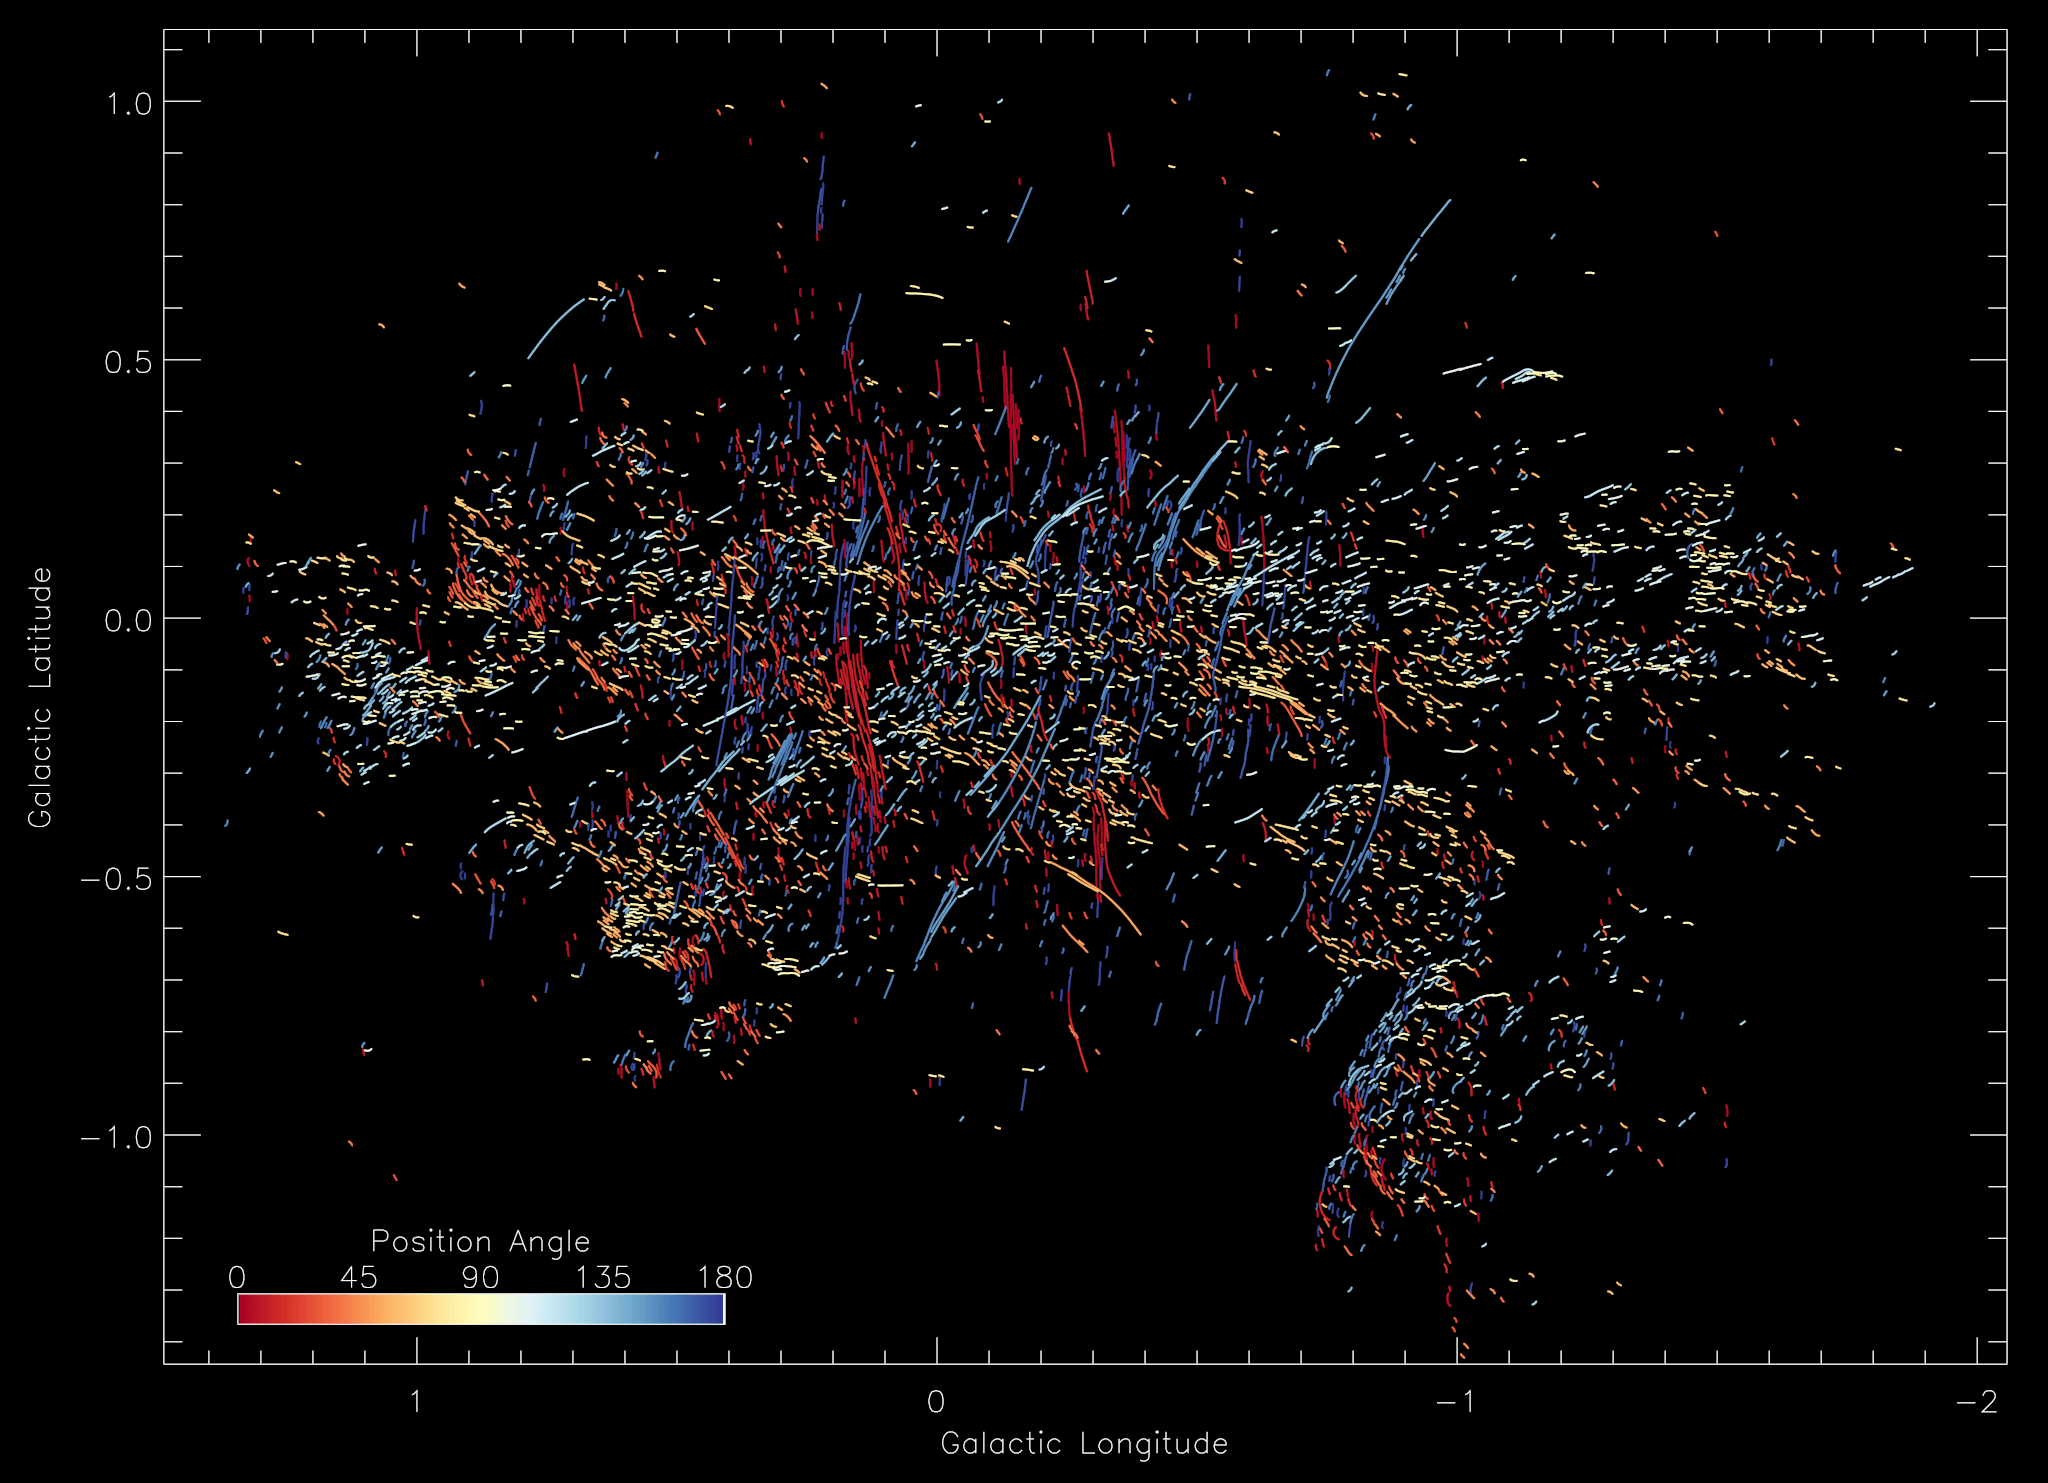 MeerKAT image of the galactic center with color-coded position angles of all filaments. 